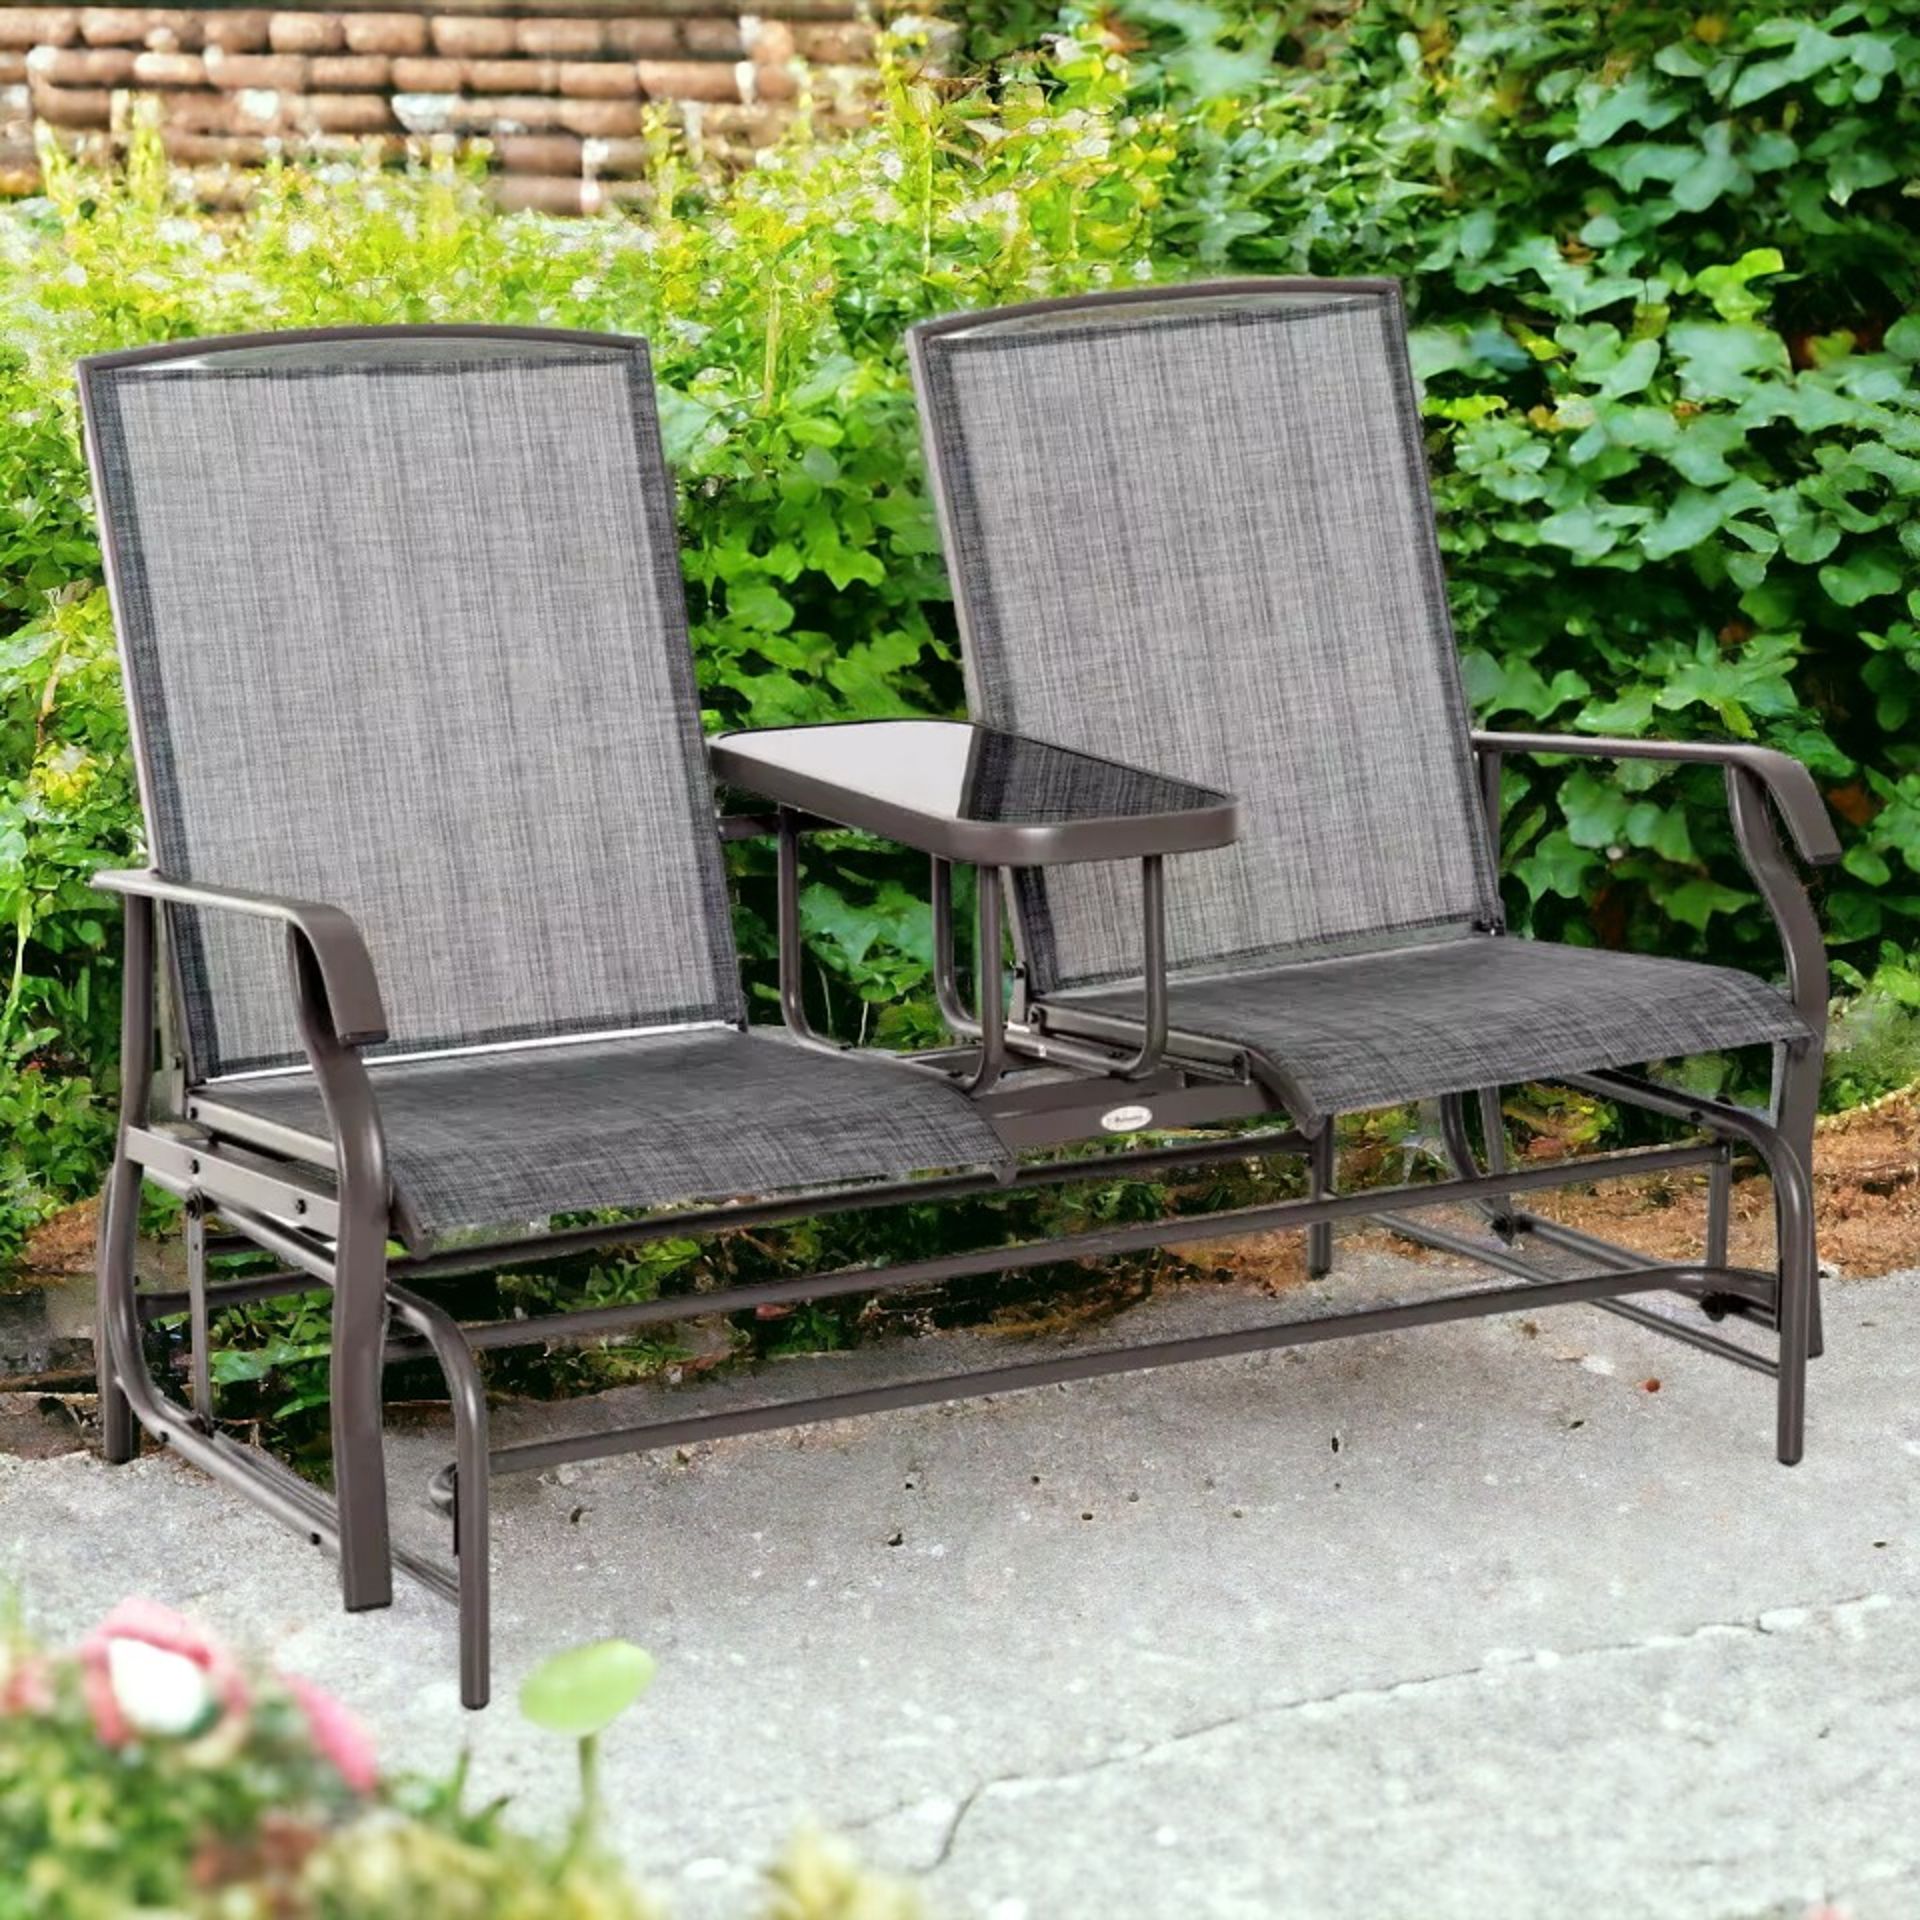 FREE DELIVERY - BRAND NEW 2 SEATER ROCKER DOUBLE ROCKING CHAIR LOUNGER OUTDOOR GARDEN FURNITURE - Image 2 of 2